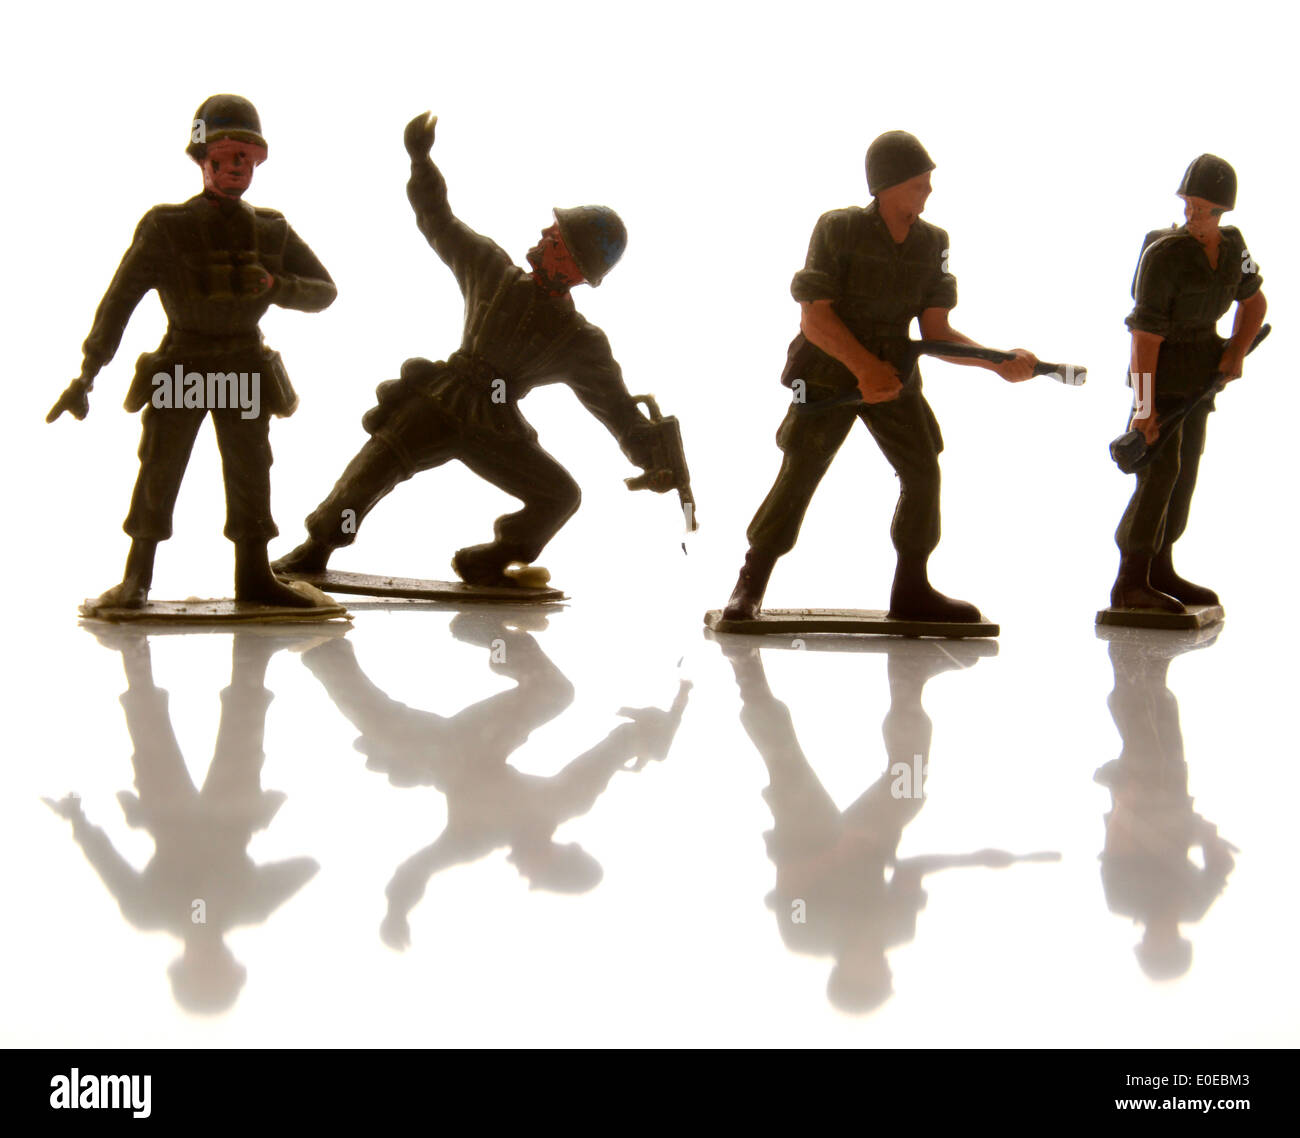 Toy soldiers figurines Stock Photo